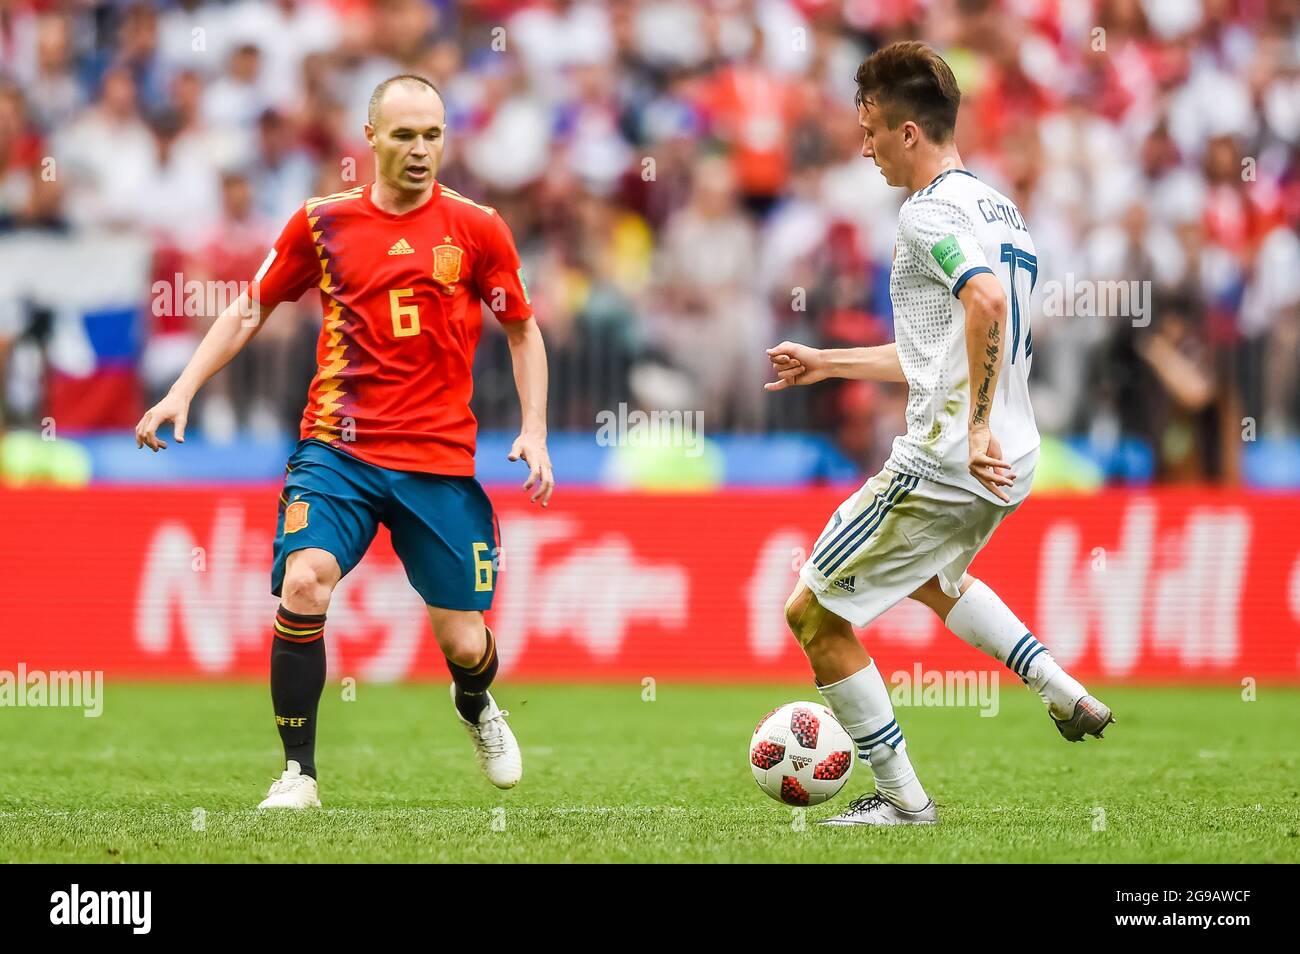 Moscow, Russia – July 1, 2018. Russia national team midfielder Aleksandr Golovin against Spain midfielder Andres Iniesta during FIFA World Cup 2018 Ro Stock Photo